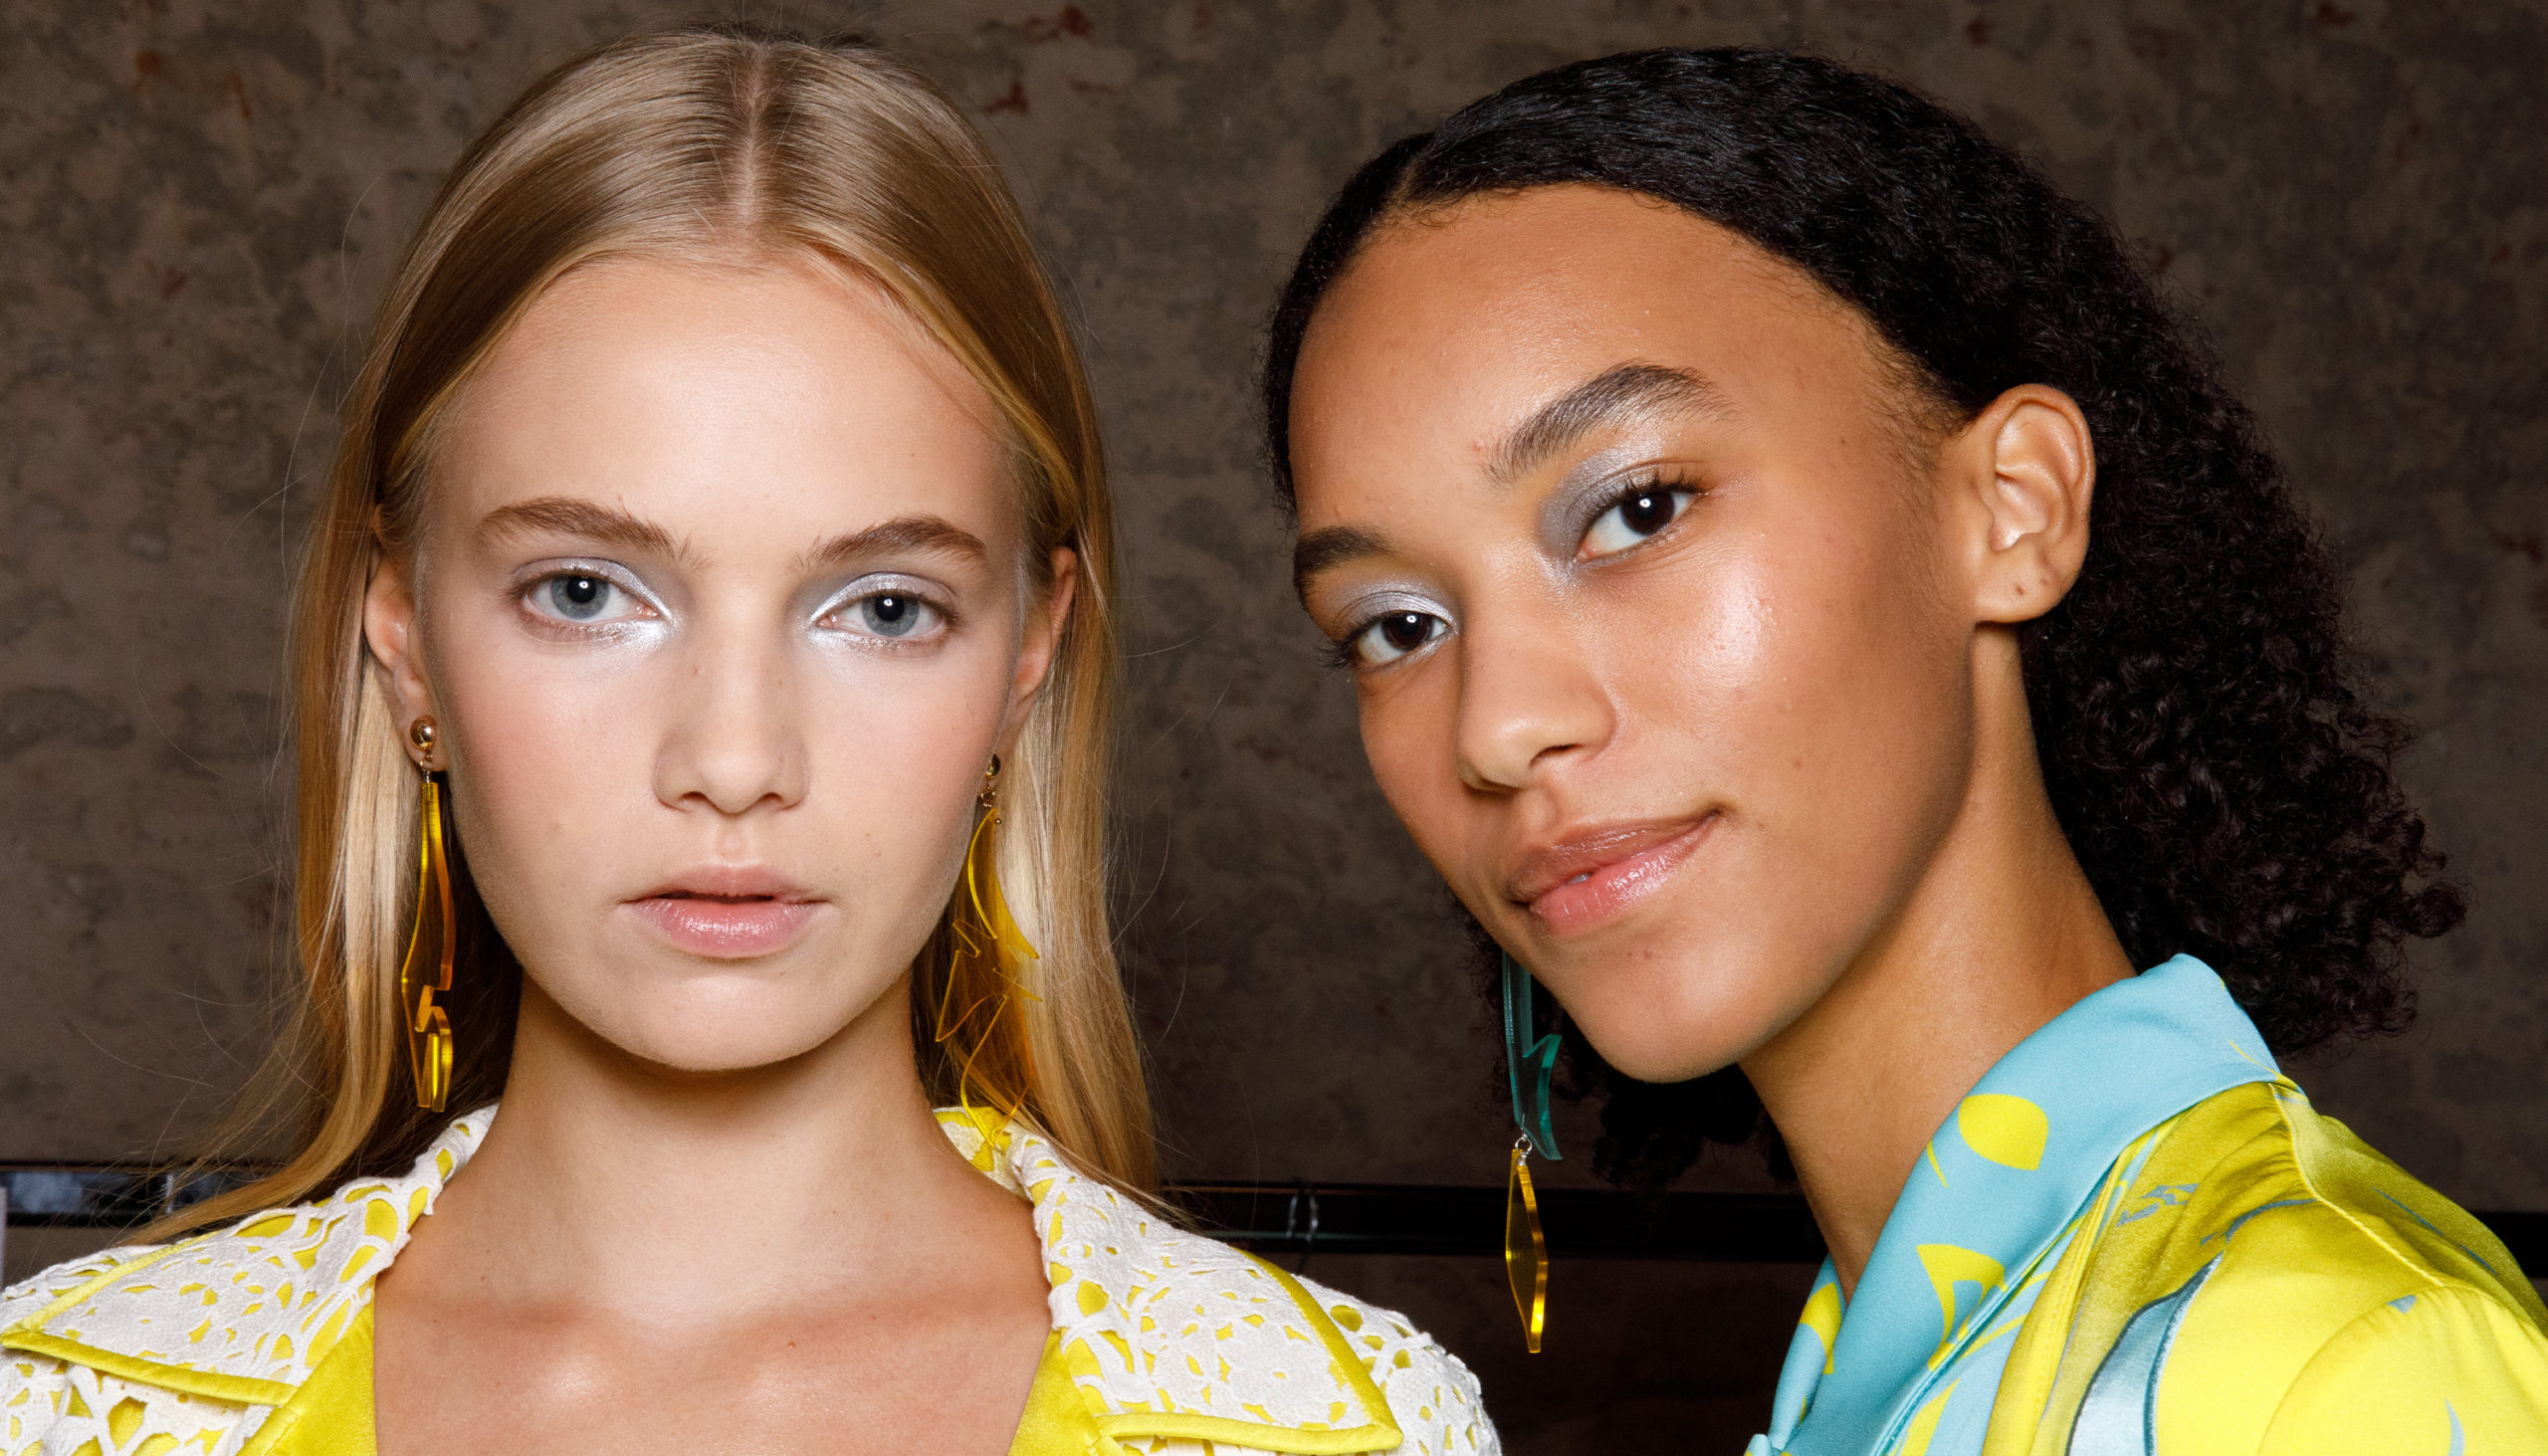 Silver Eyeliner Is Everywhere—Here’s How to Wear It